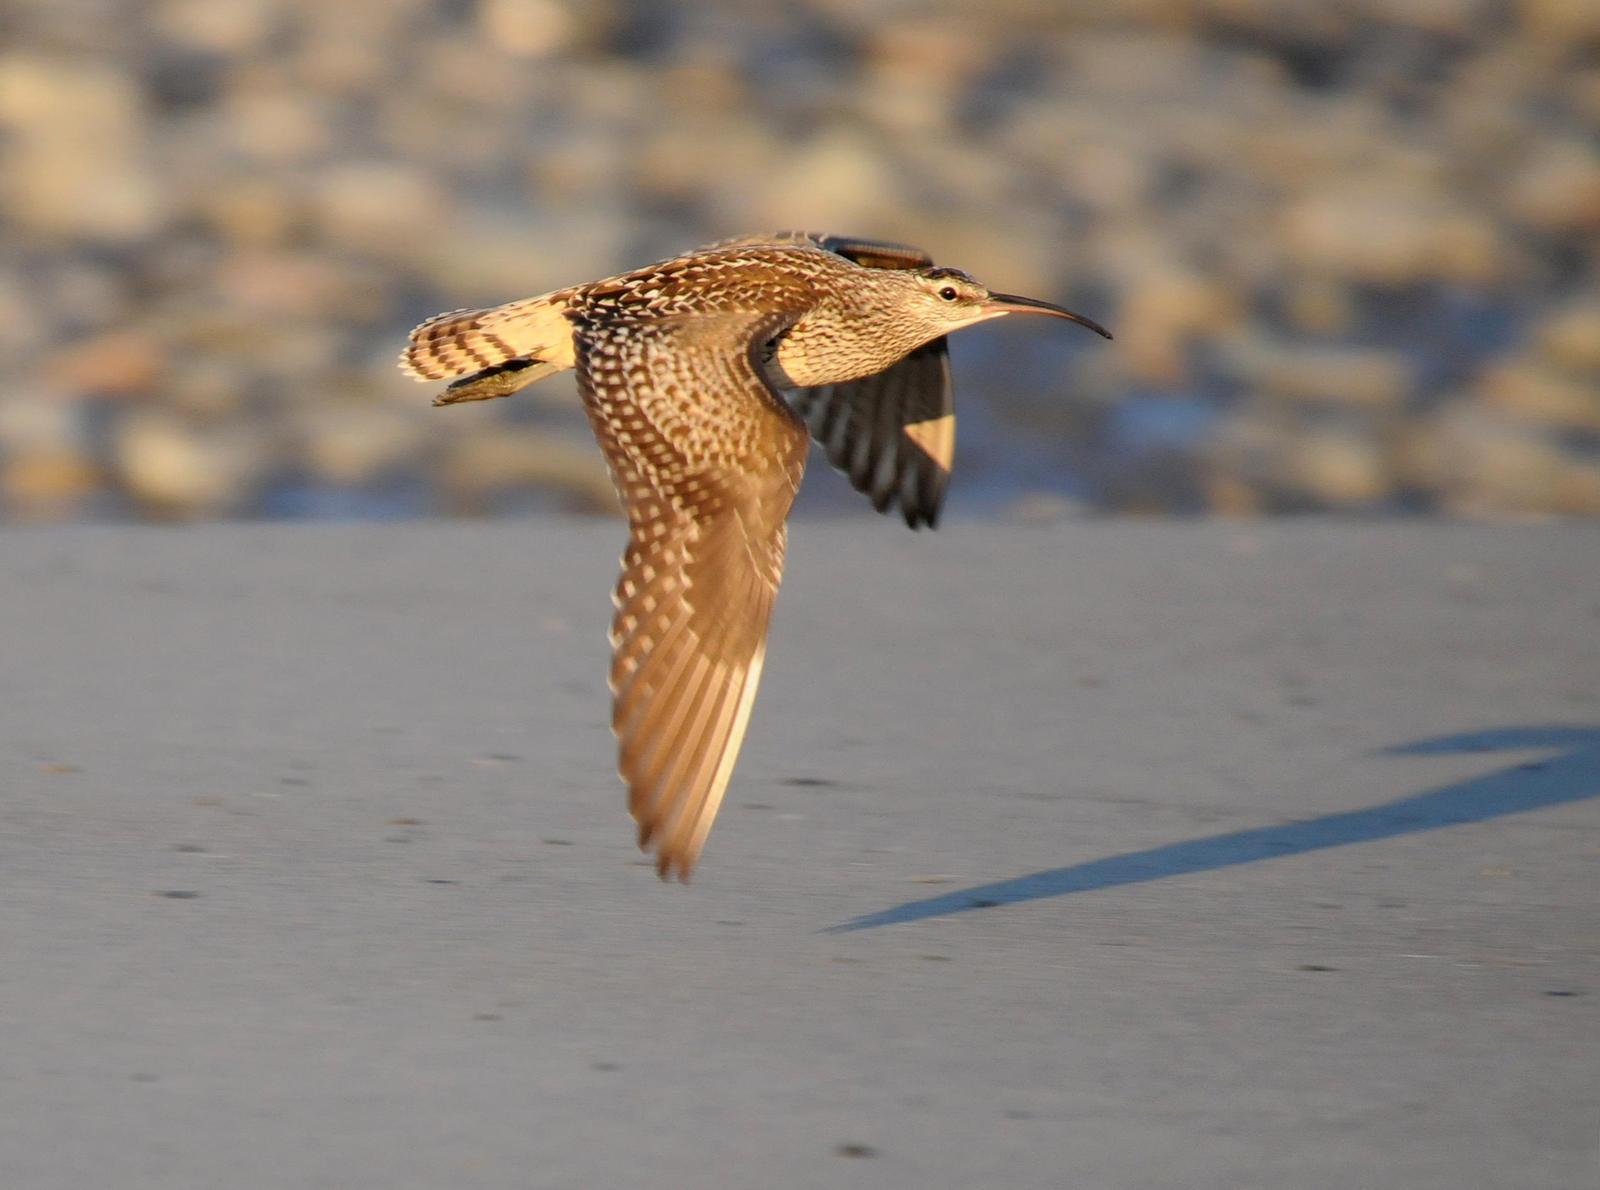 Bristle-thighed Curlew Photo by Steven Mlodinow